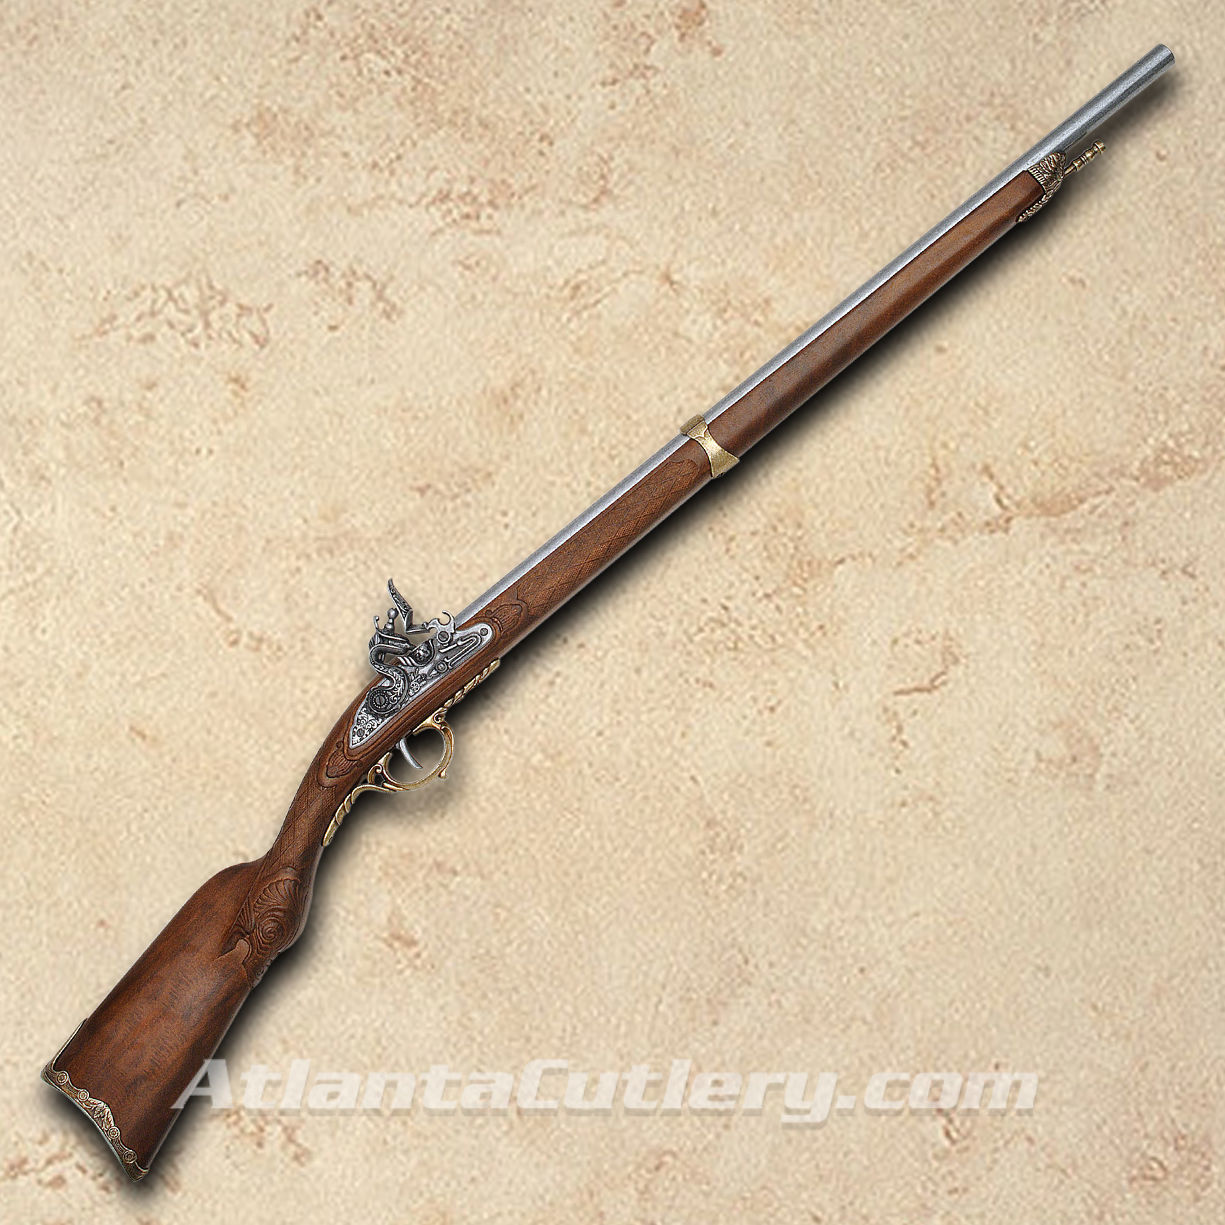 Replica non firing Napoleon Flintlock Rifle has sculpted wooden stock, intricate cast metal, parts move and trigger pulls